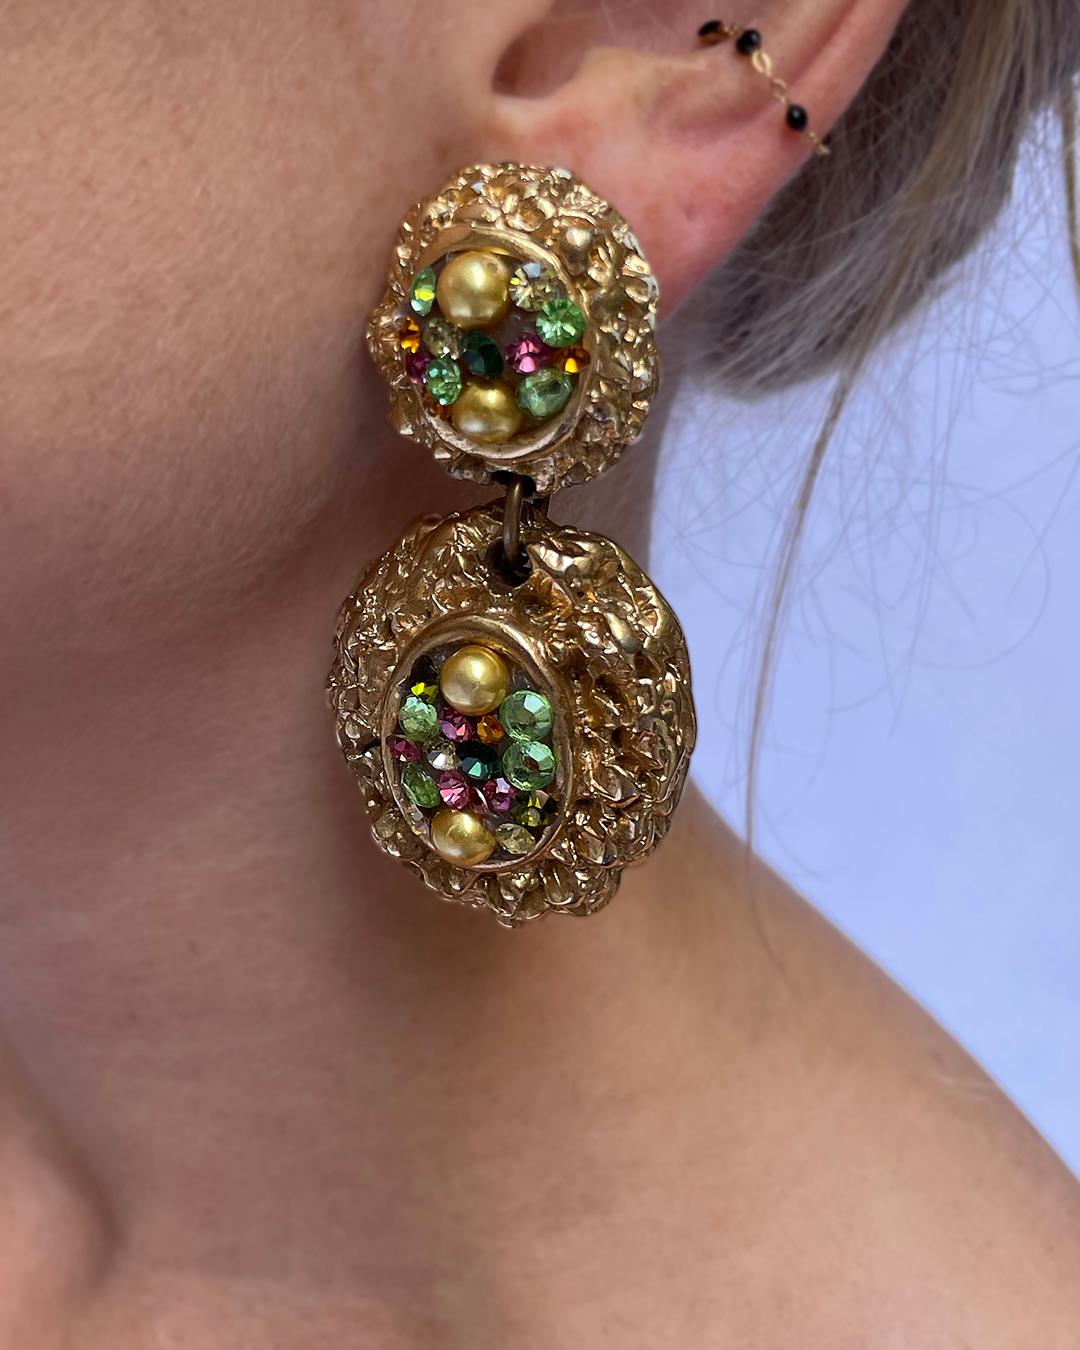 The only thing cooler than this earring is the fact that there is only one of them! HOW chic?! Wear them with just a tiny little stud or gold huggie in the other ear. These earrings feature a brushed gold surface, textured with swirling, and set